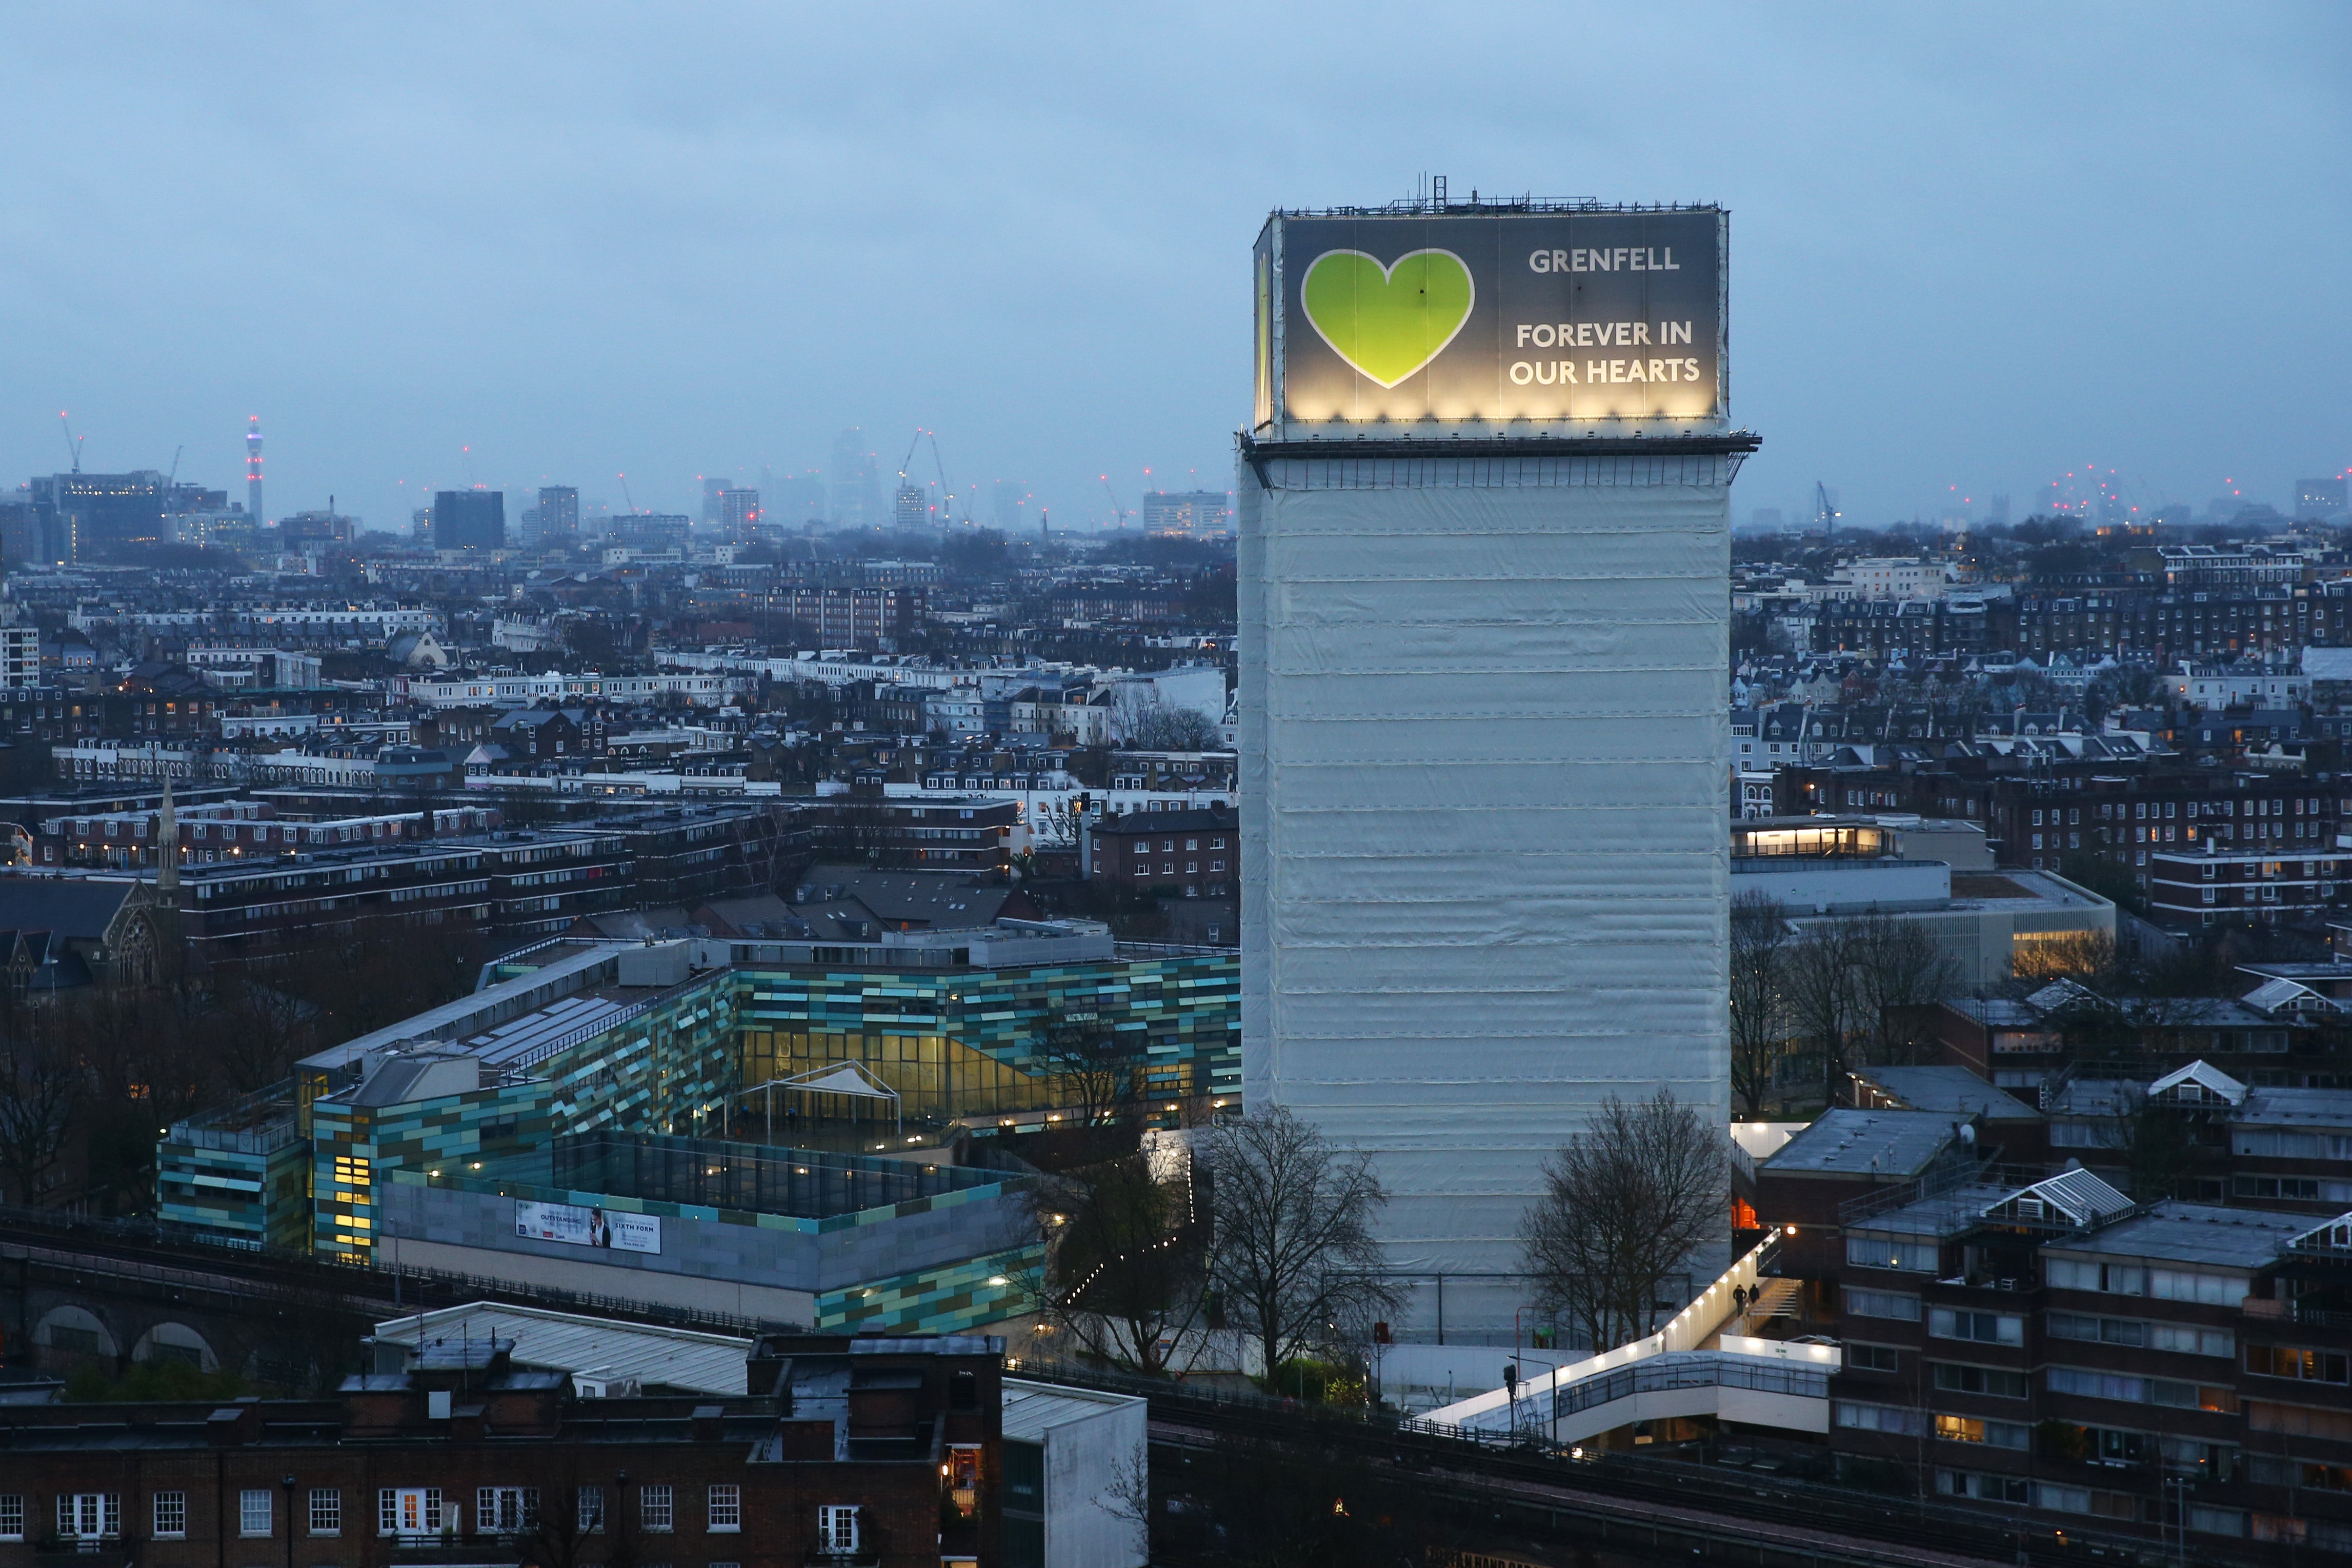 Ministers are expected to announce this month that Grenfell Tower will be demolished amid safety concerns